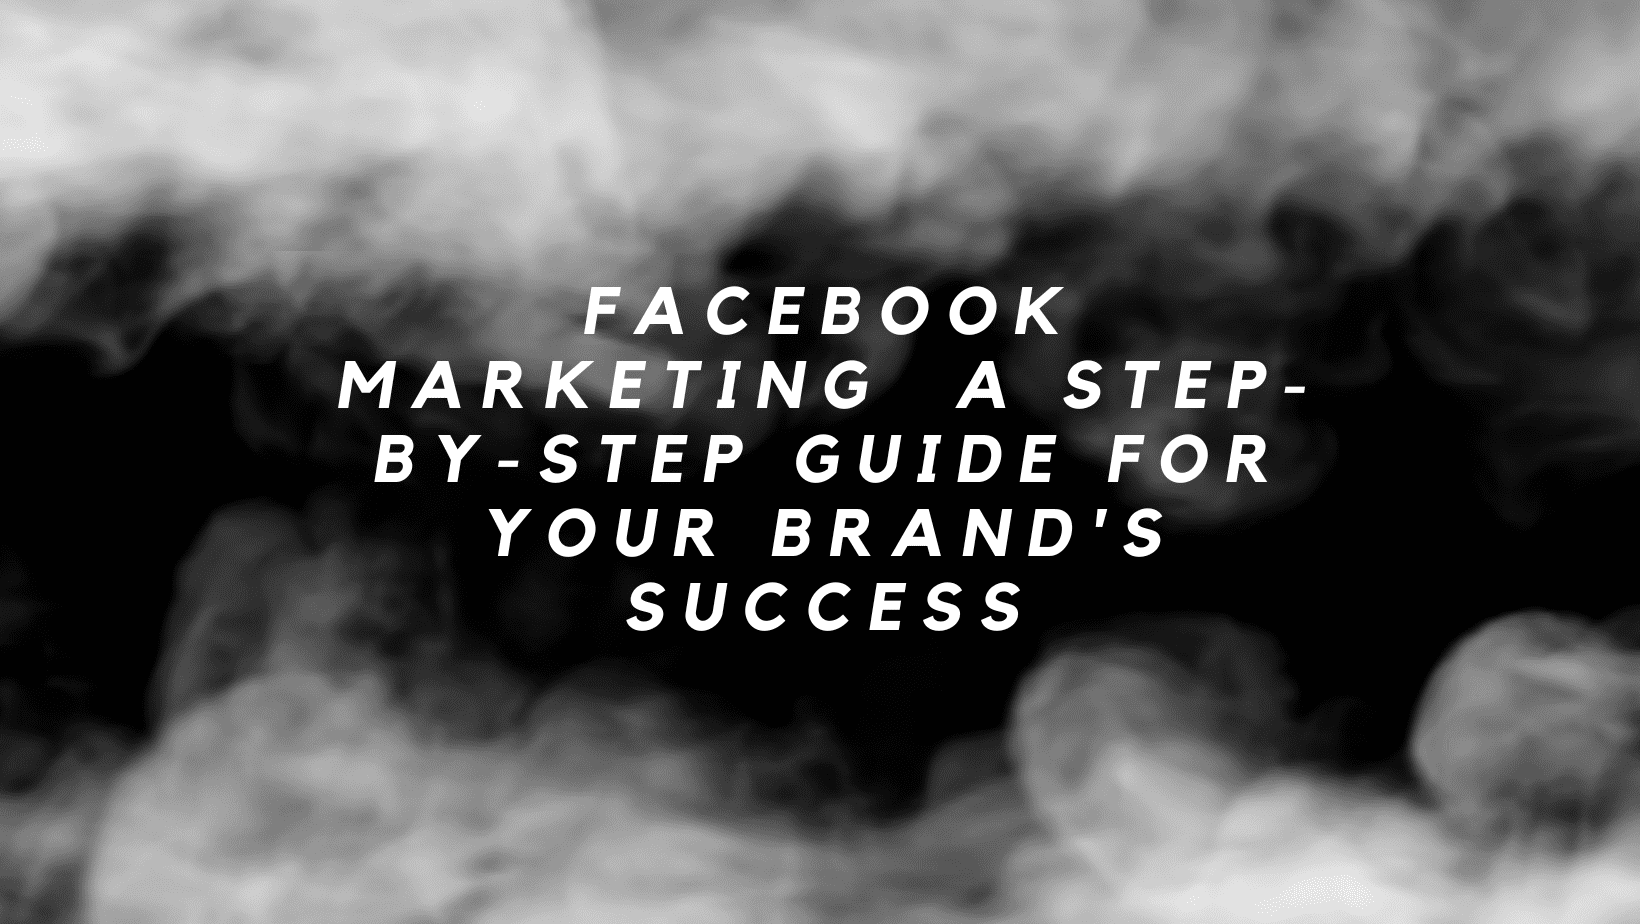 Facebook Marketing Made Simple: A Step-by-Step Guide for Your Brand's Success